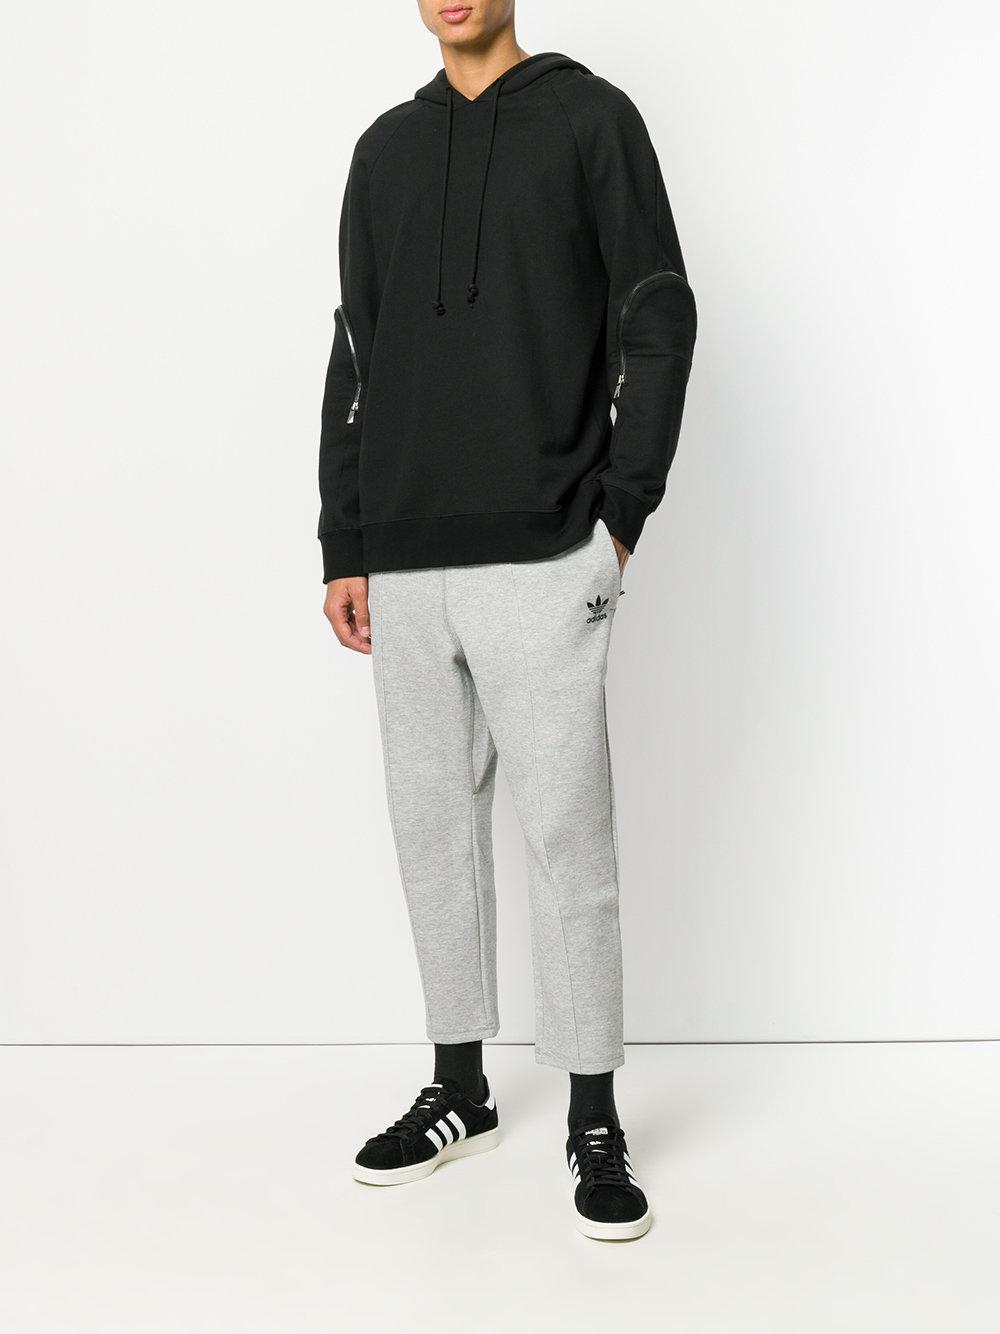 instinct cropped pintuck track pants